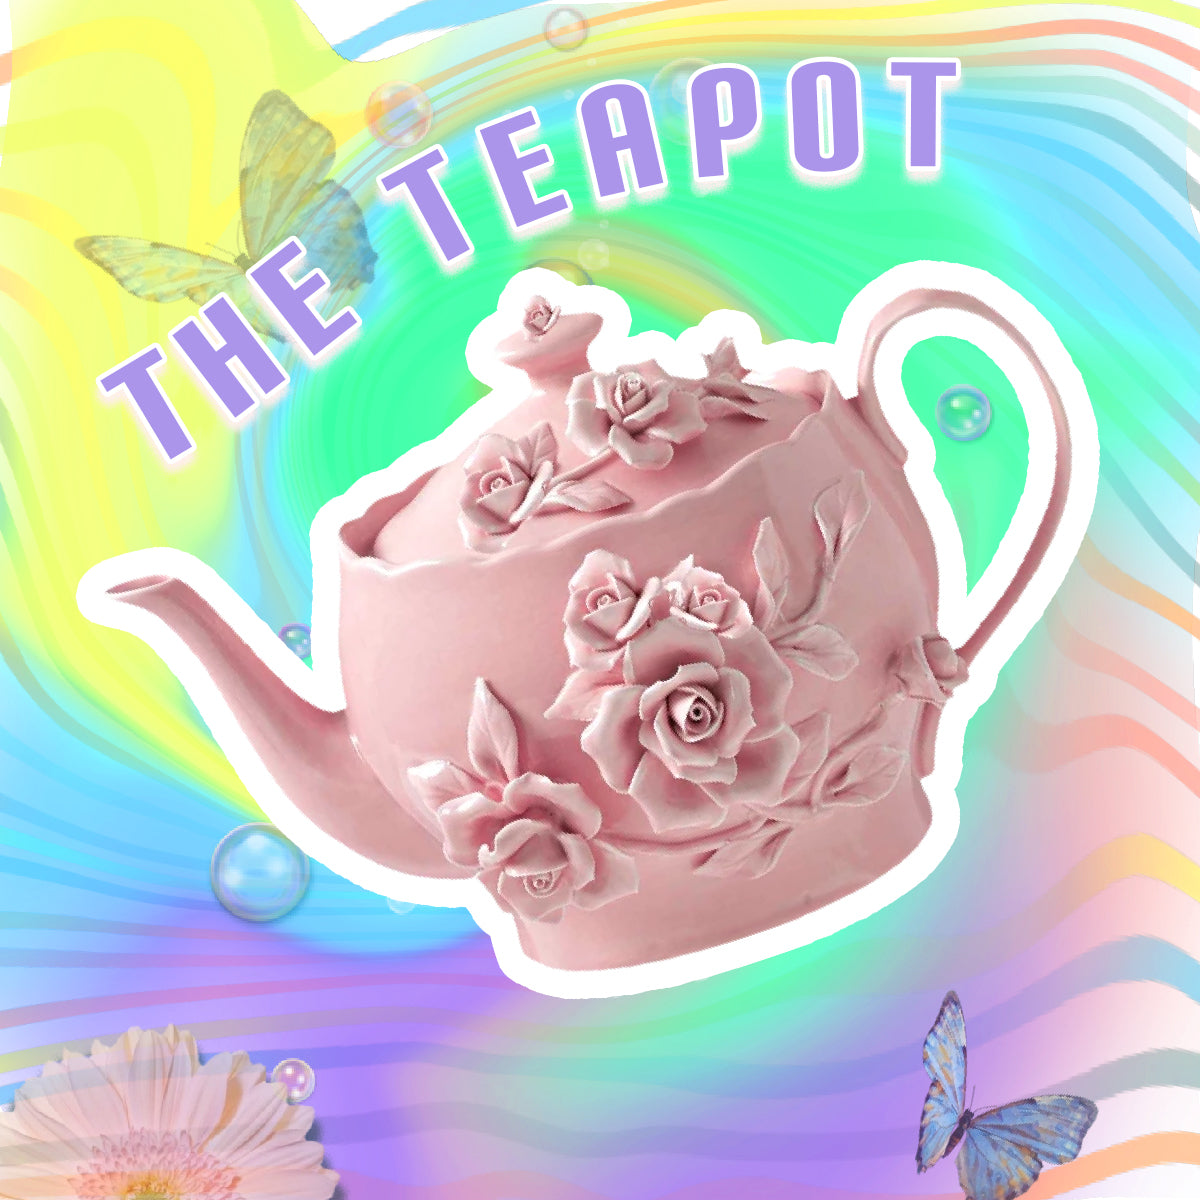 The Teapot - Stereoplasm